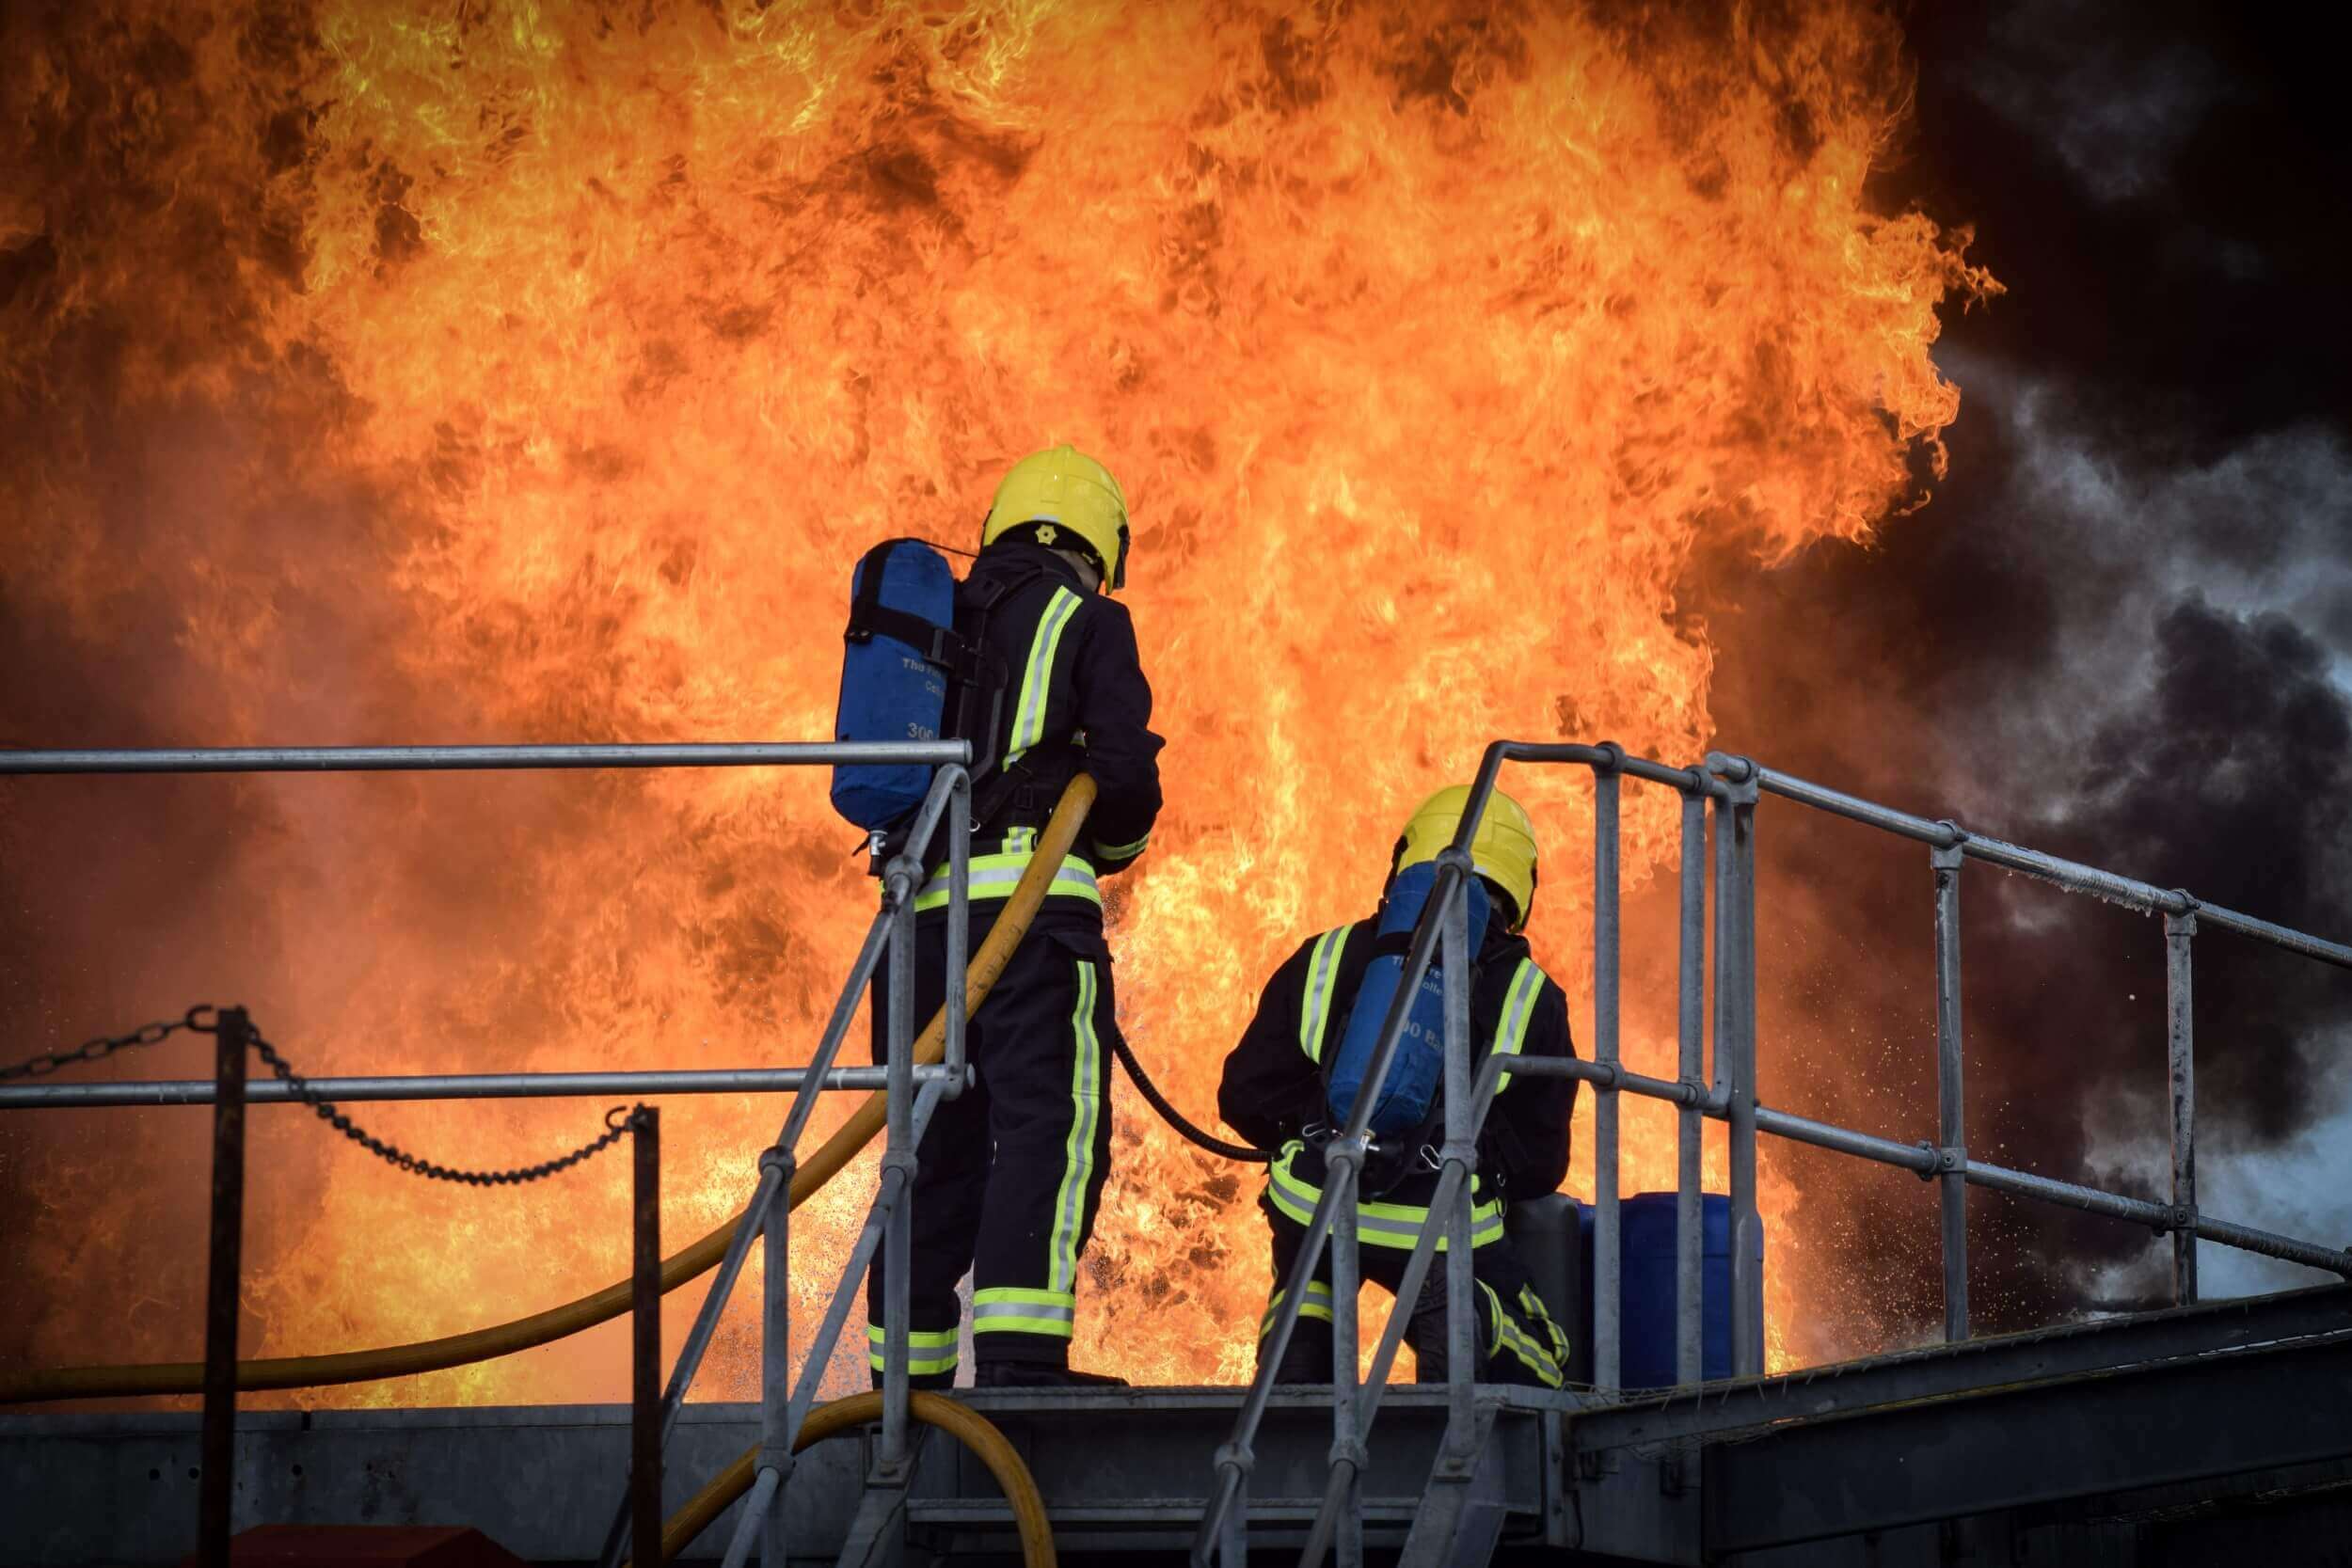 Firefighter trainees tackling large fire with fire hose